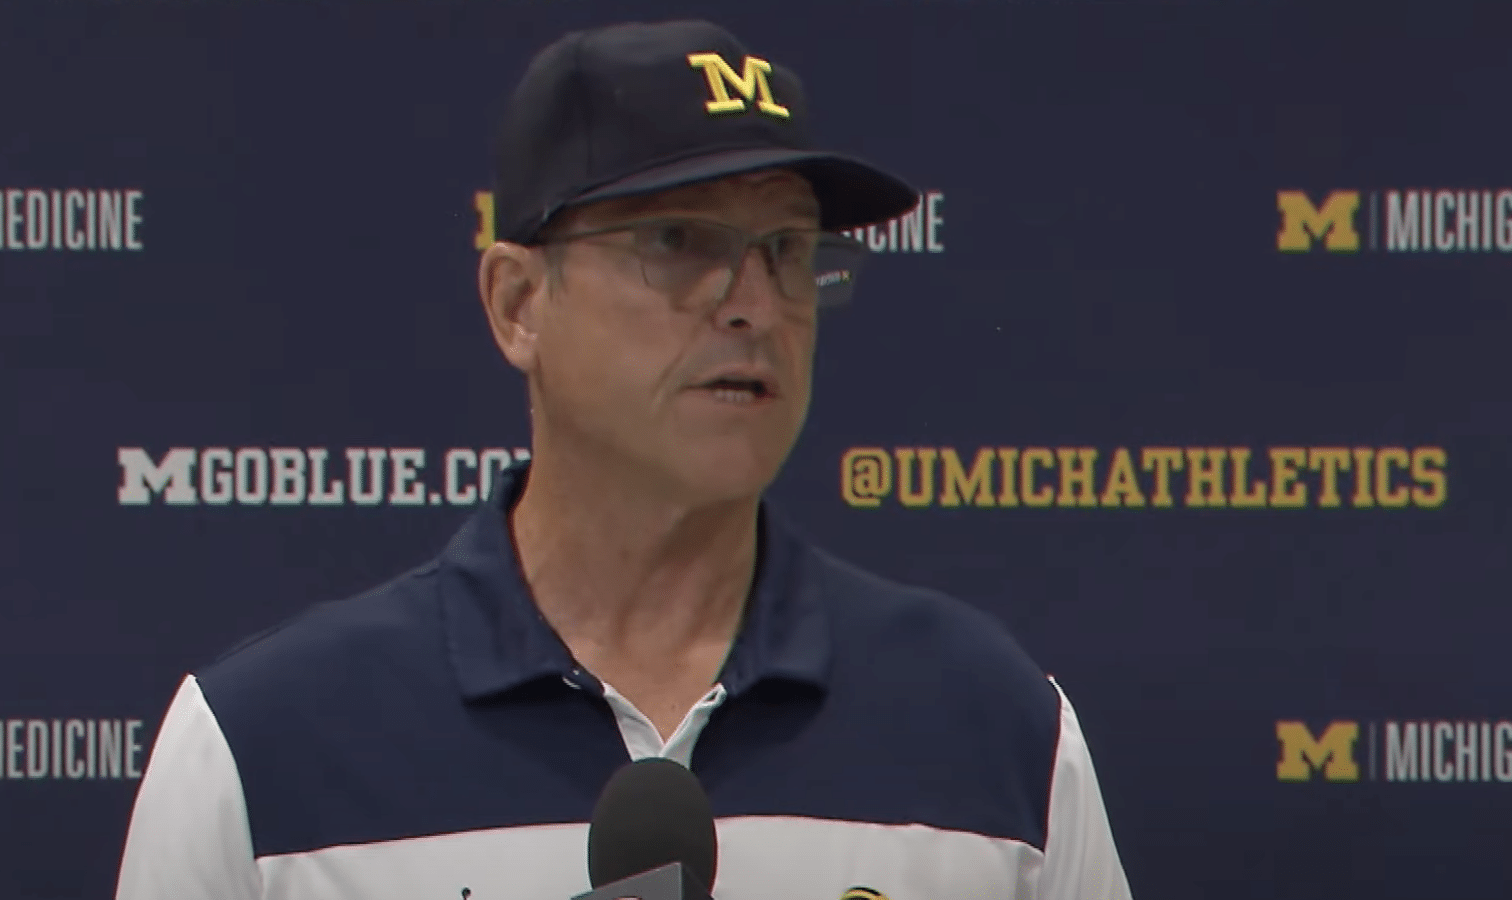 Michigan Football Coach Jim Harbaugh weighs in on suspension